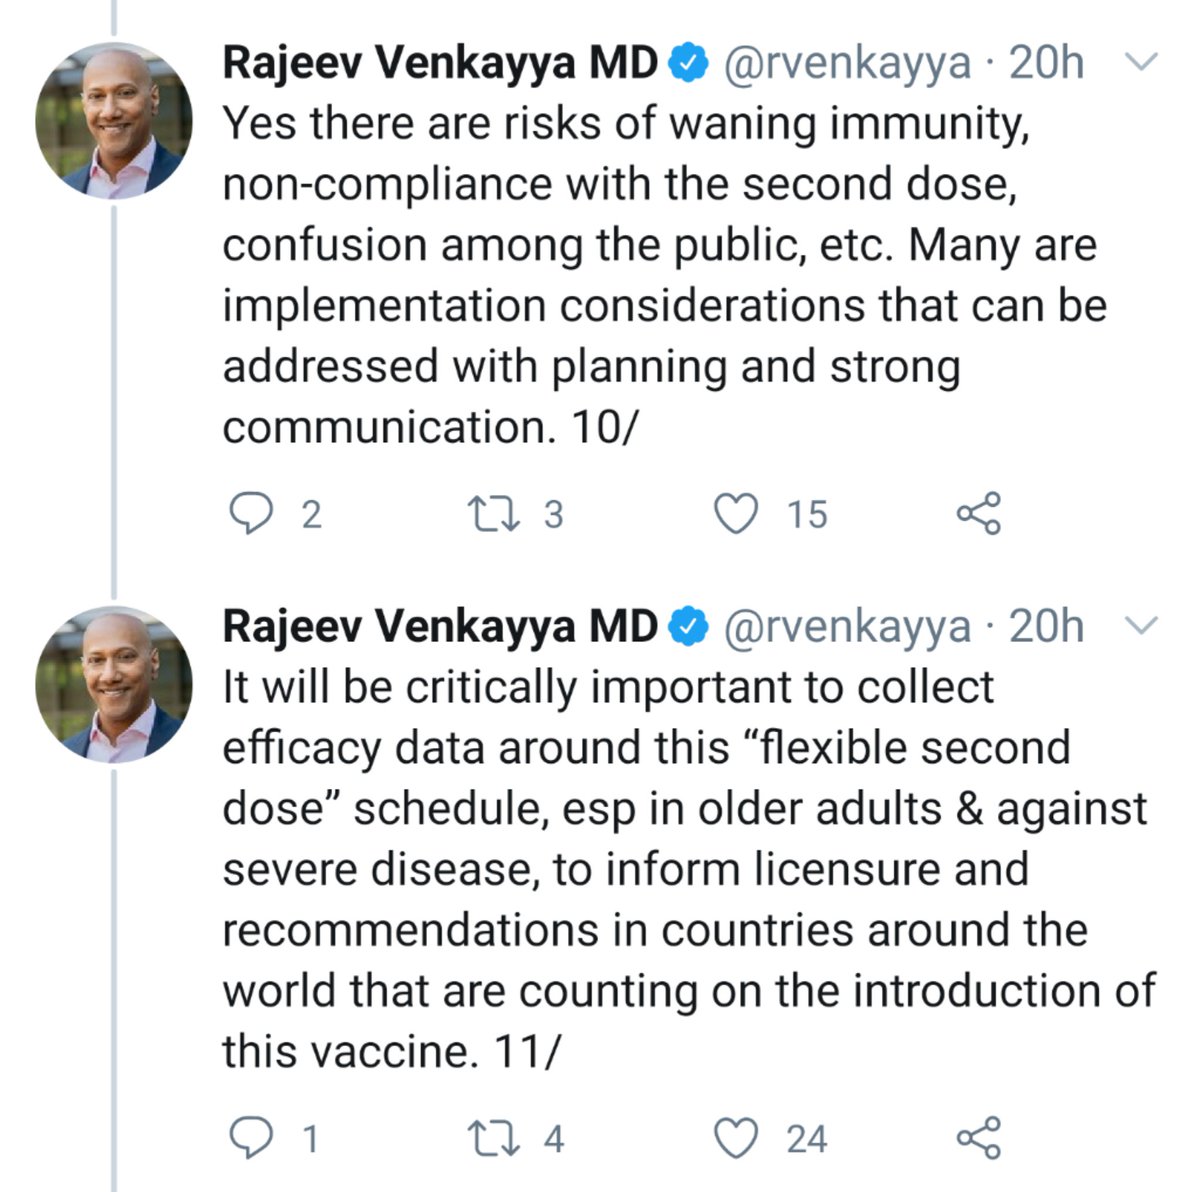 Measured [Thread] of [Threads] explaining why the decision to extend period between doses may be "justifiable" in the circumstances: https://twitter.com/rvenkayya/status/1345026156257550339?s=19Noting real risks; requirements on which UK Gov't consistently fails to deliver; and still no sign of research protocols: